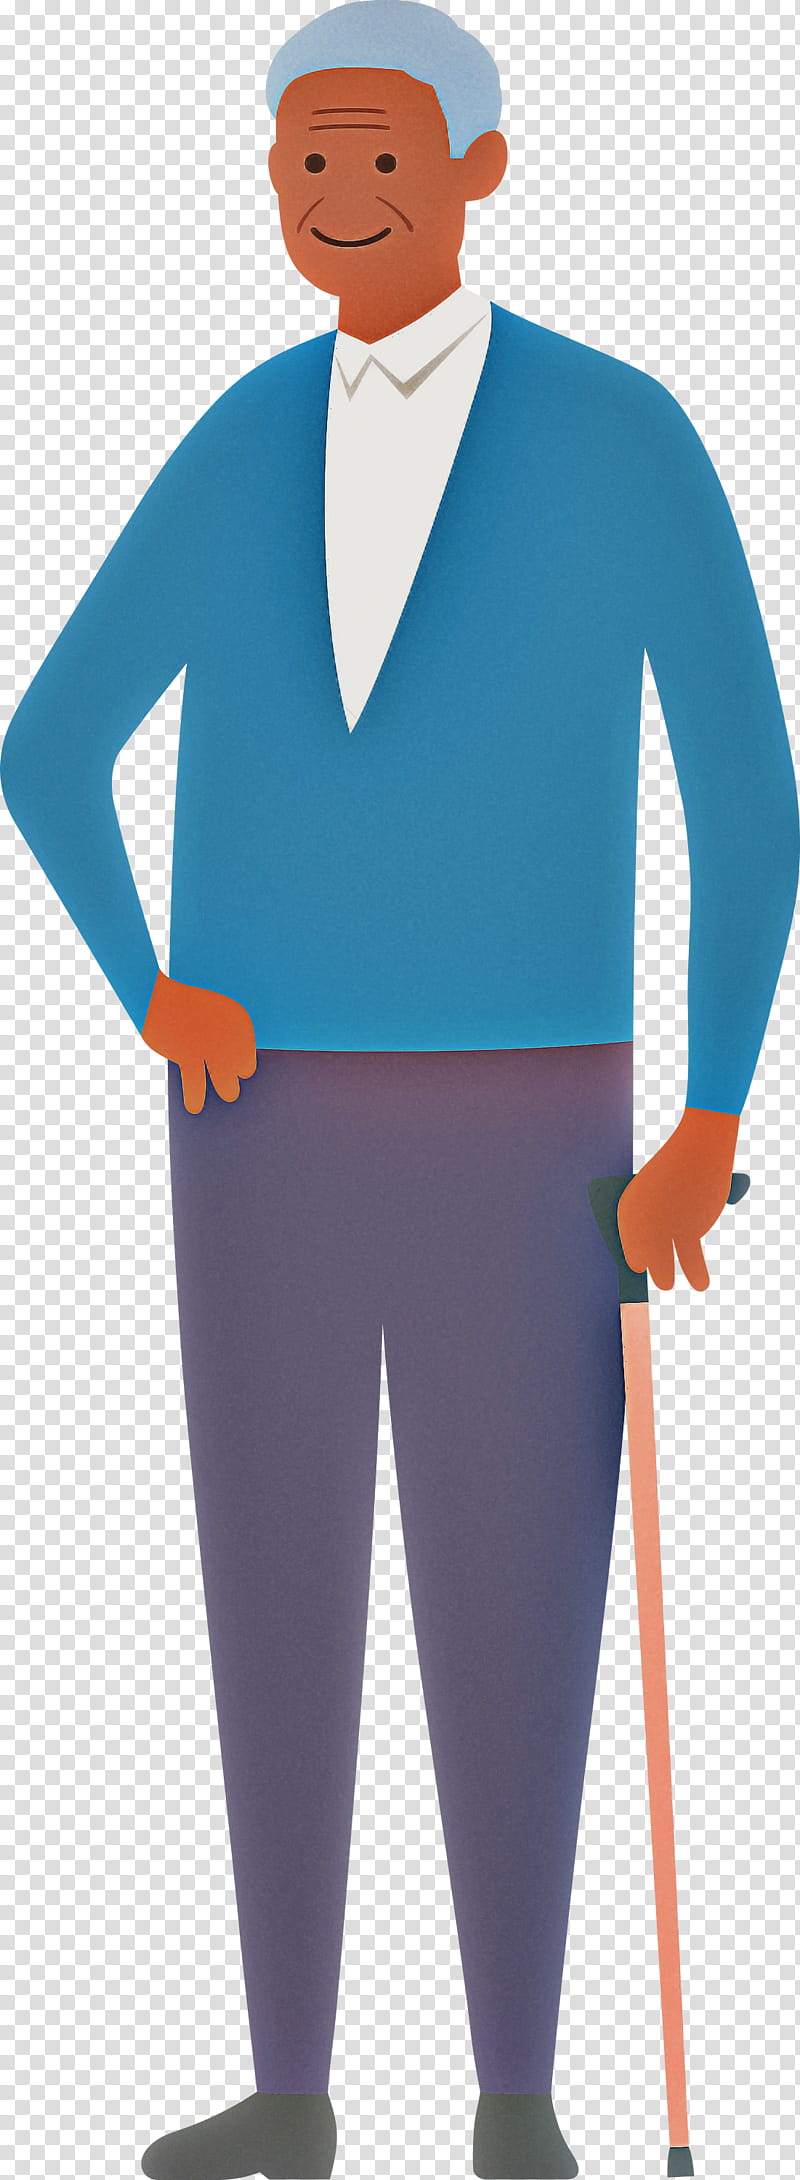 grandpa grandfather, Outerwear, Costume, Cartoon, Headgear, Character, Sleeve, Wetsuit transparent background PNG clipart